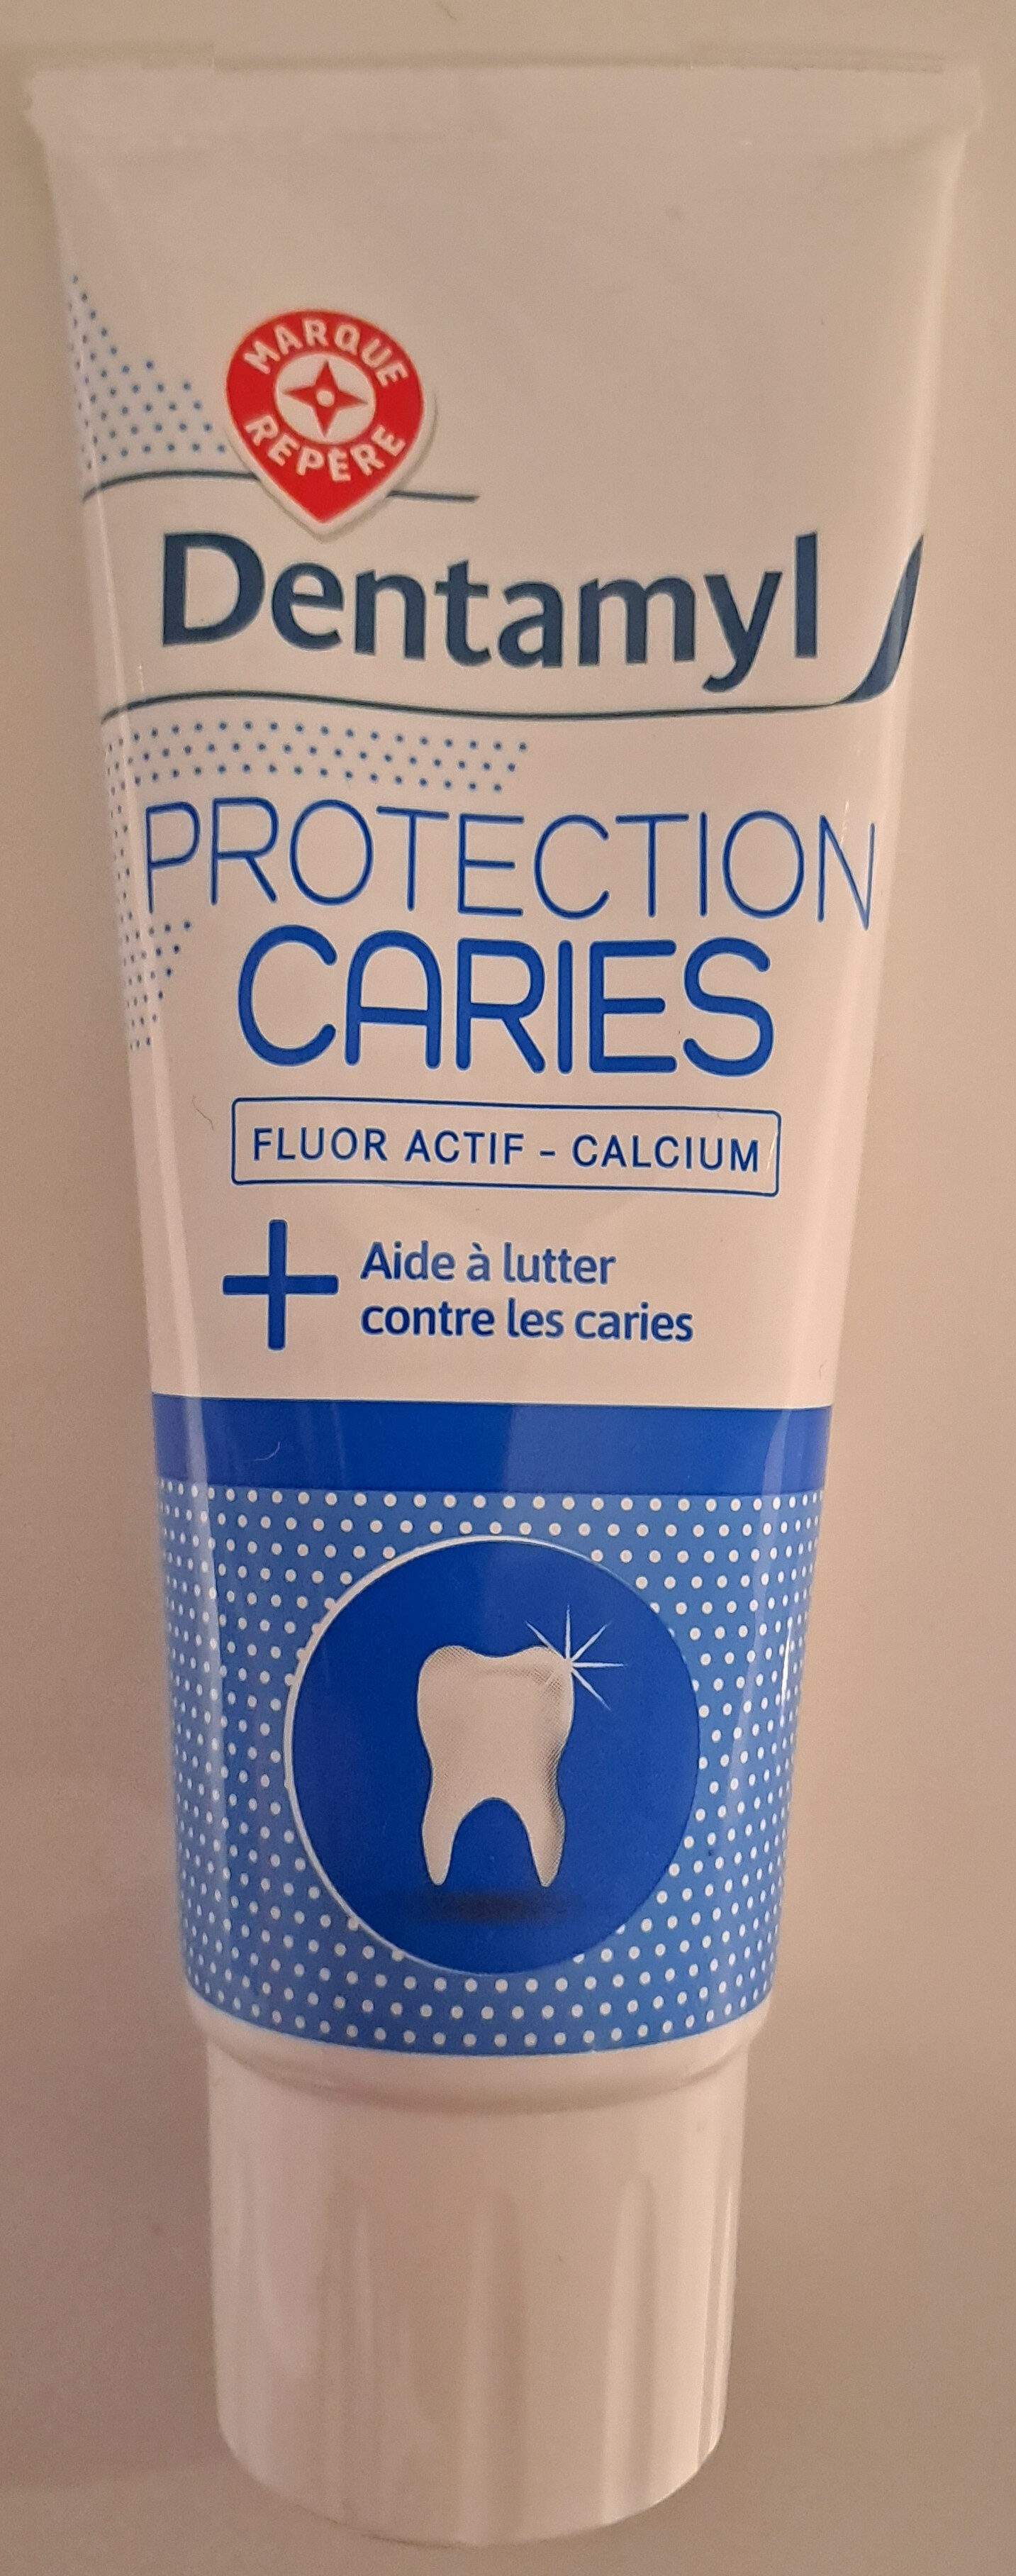 Protection caries - 製品 - fr